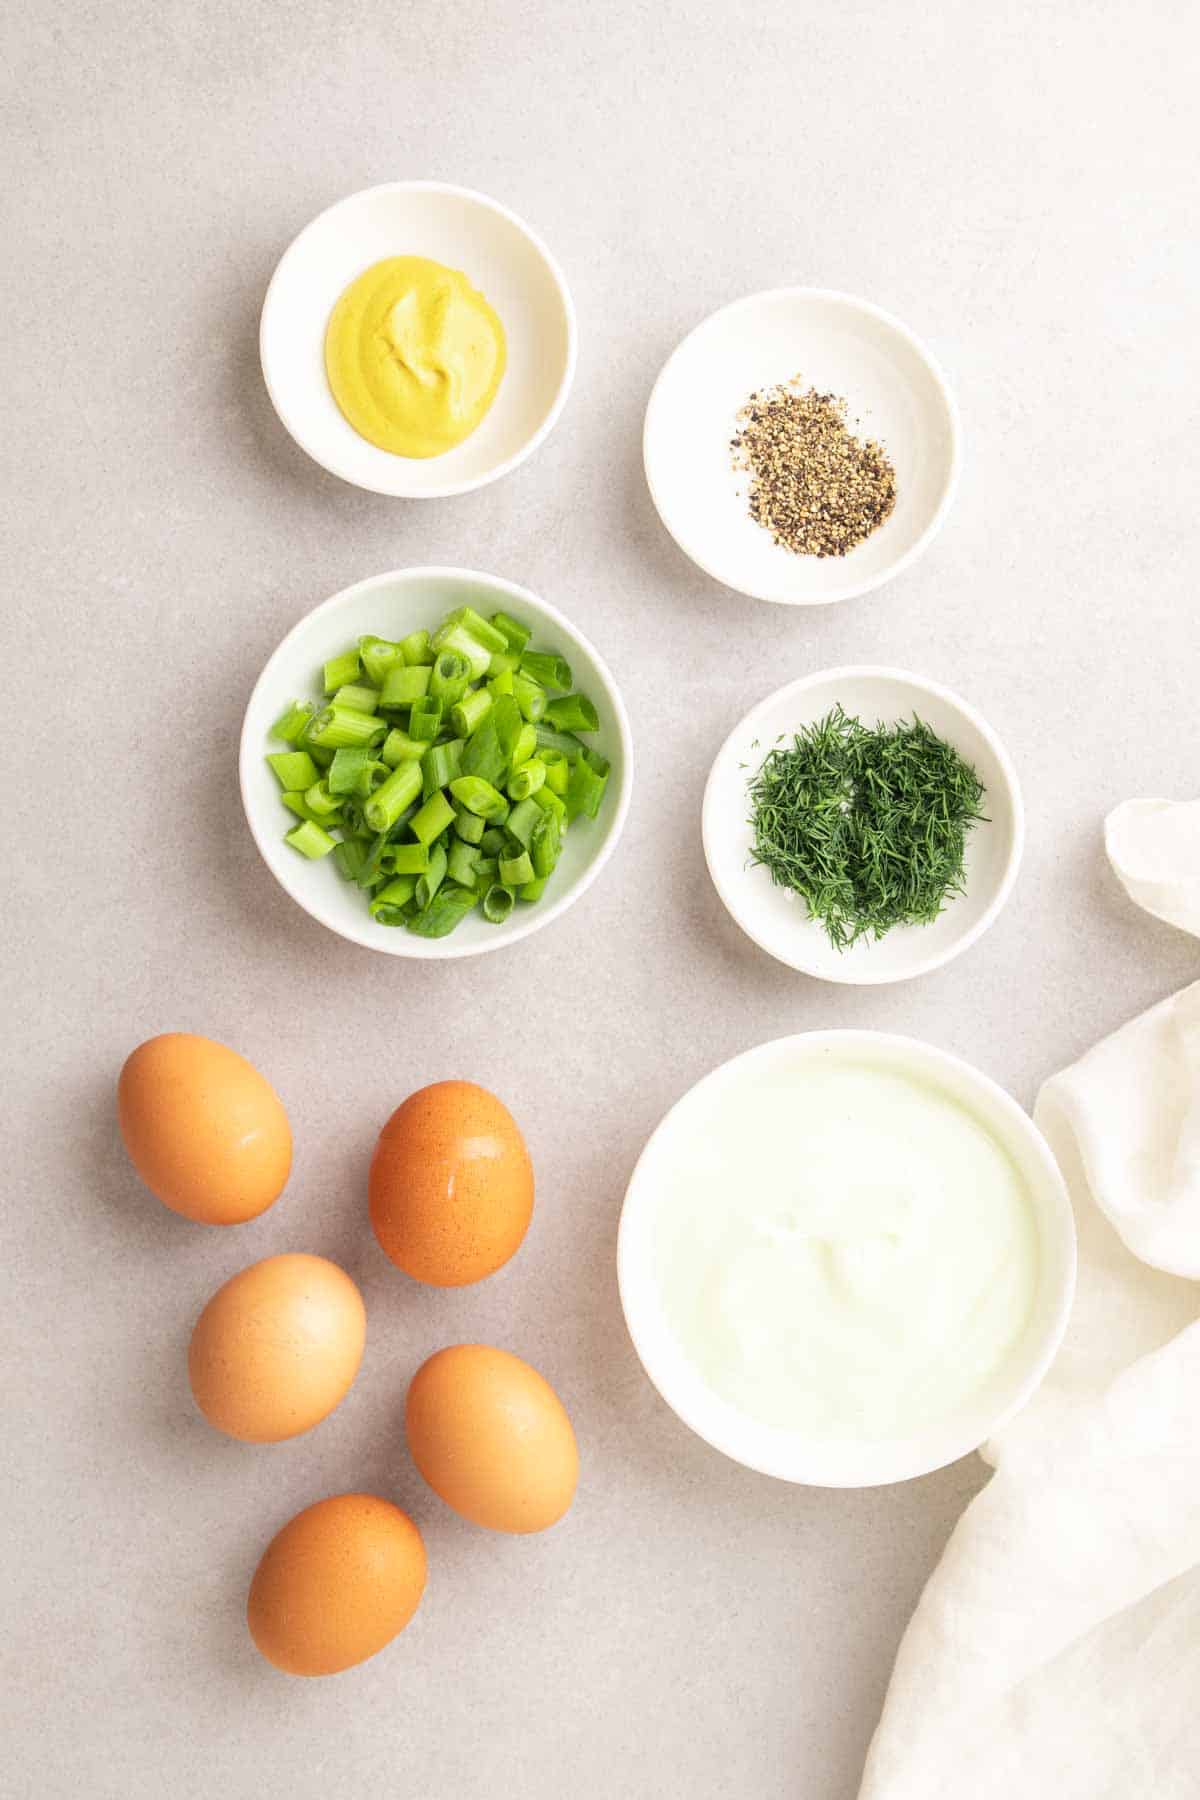 Ingredients for recipe in separate bowls and ramekins, as seen from above